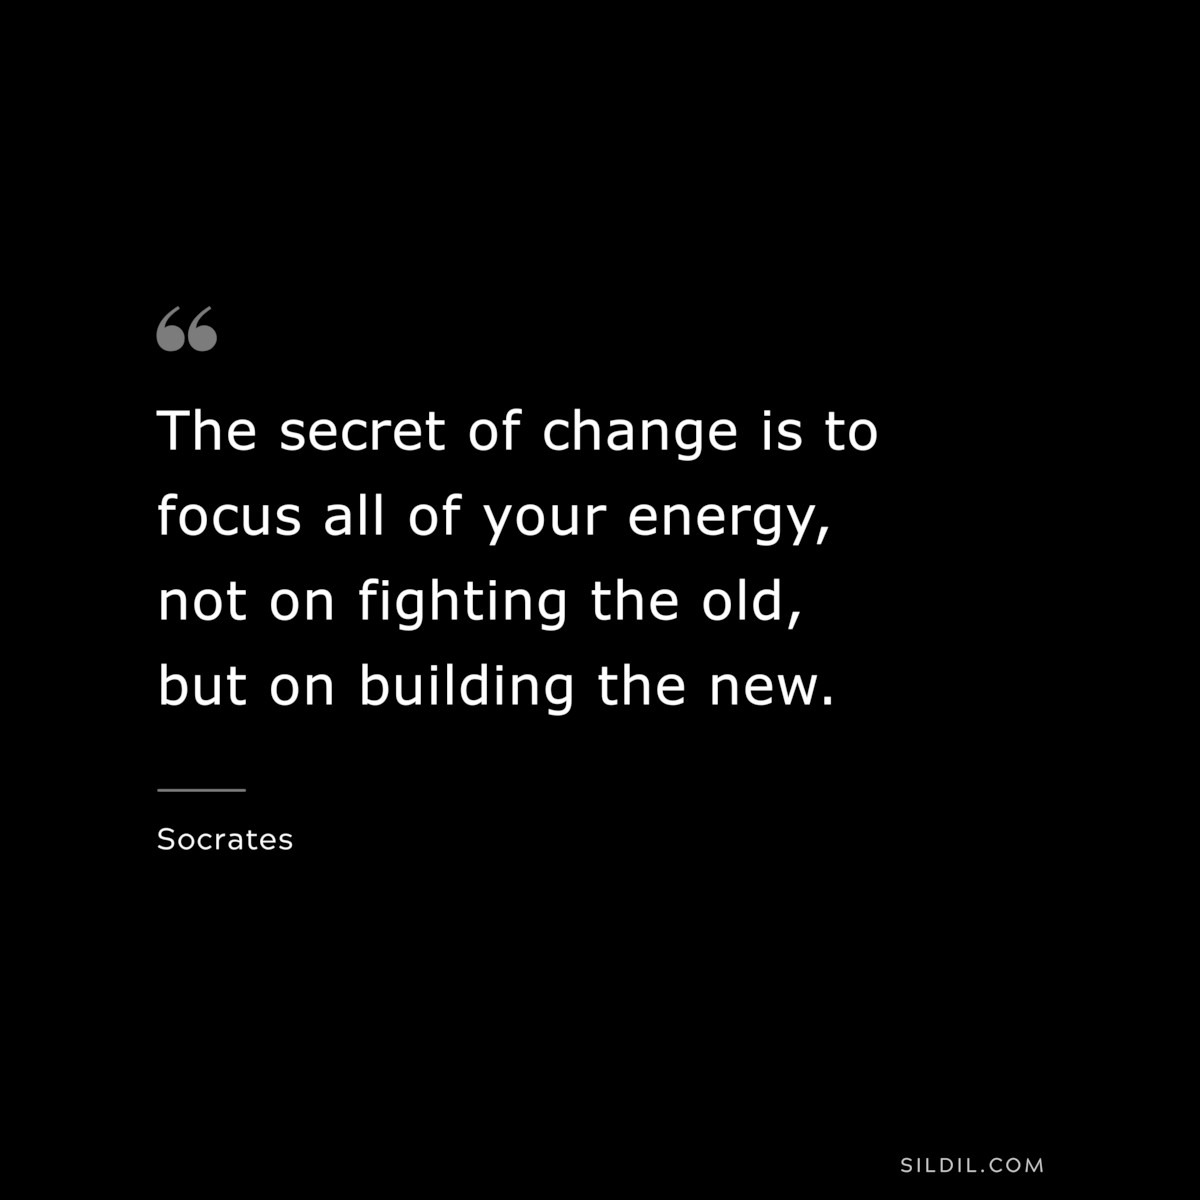 The secret of change is to focus all of your energy, not on fighting the old, but on building the new. ― Socrates